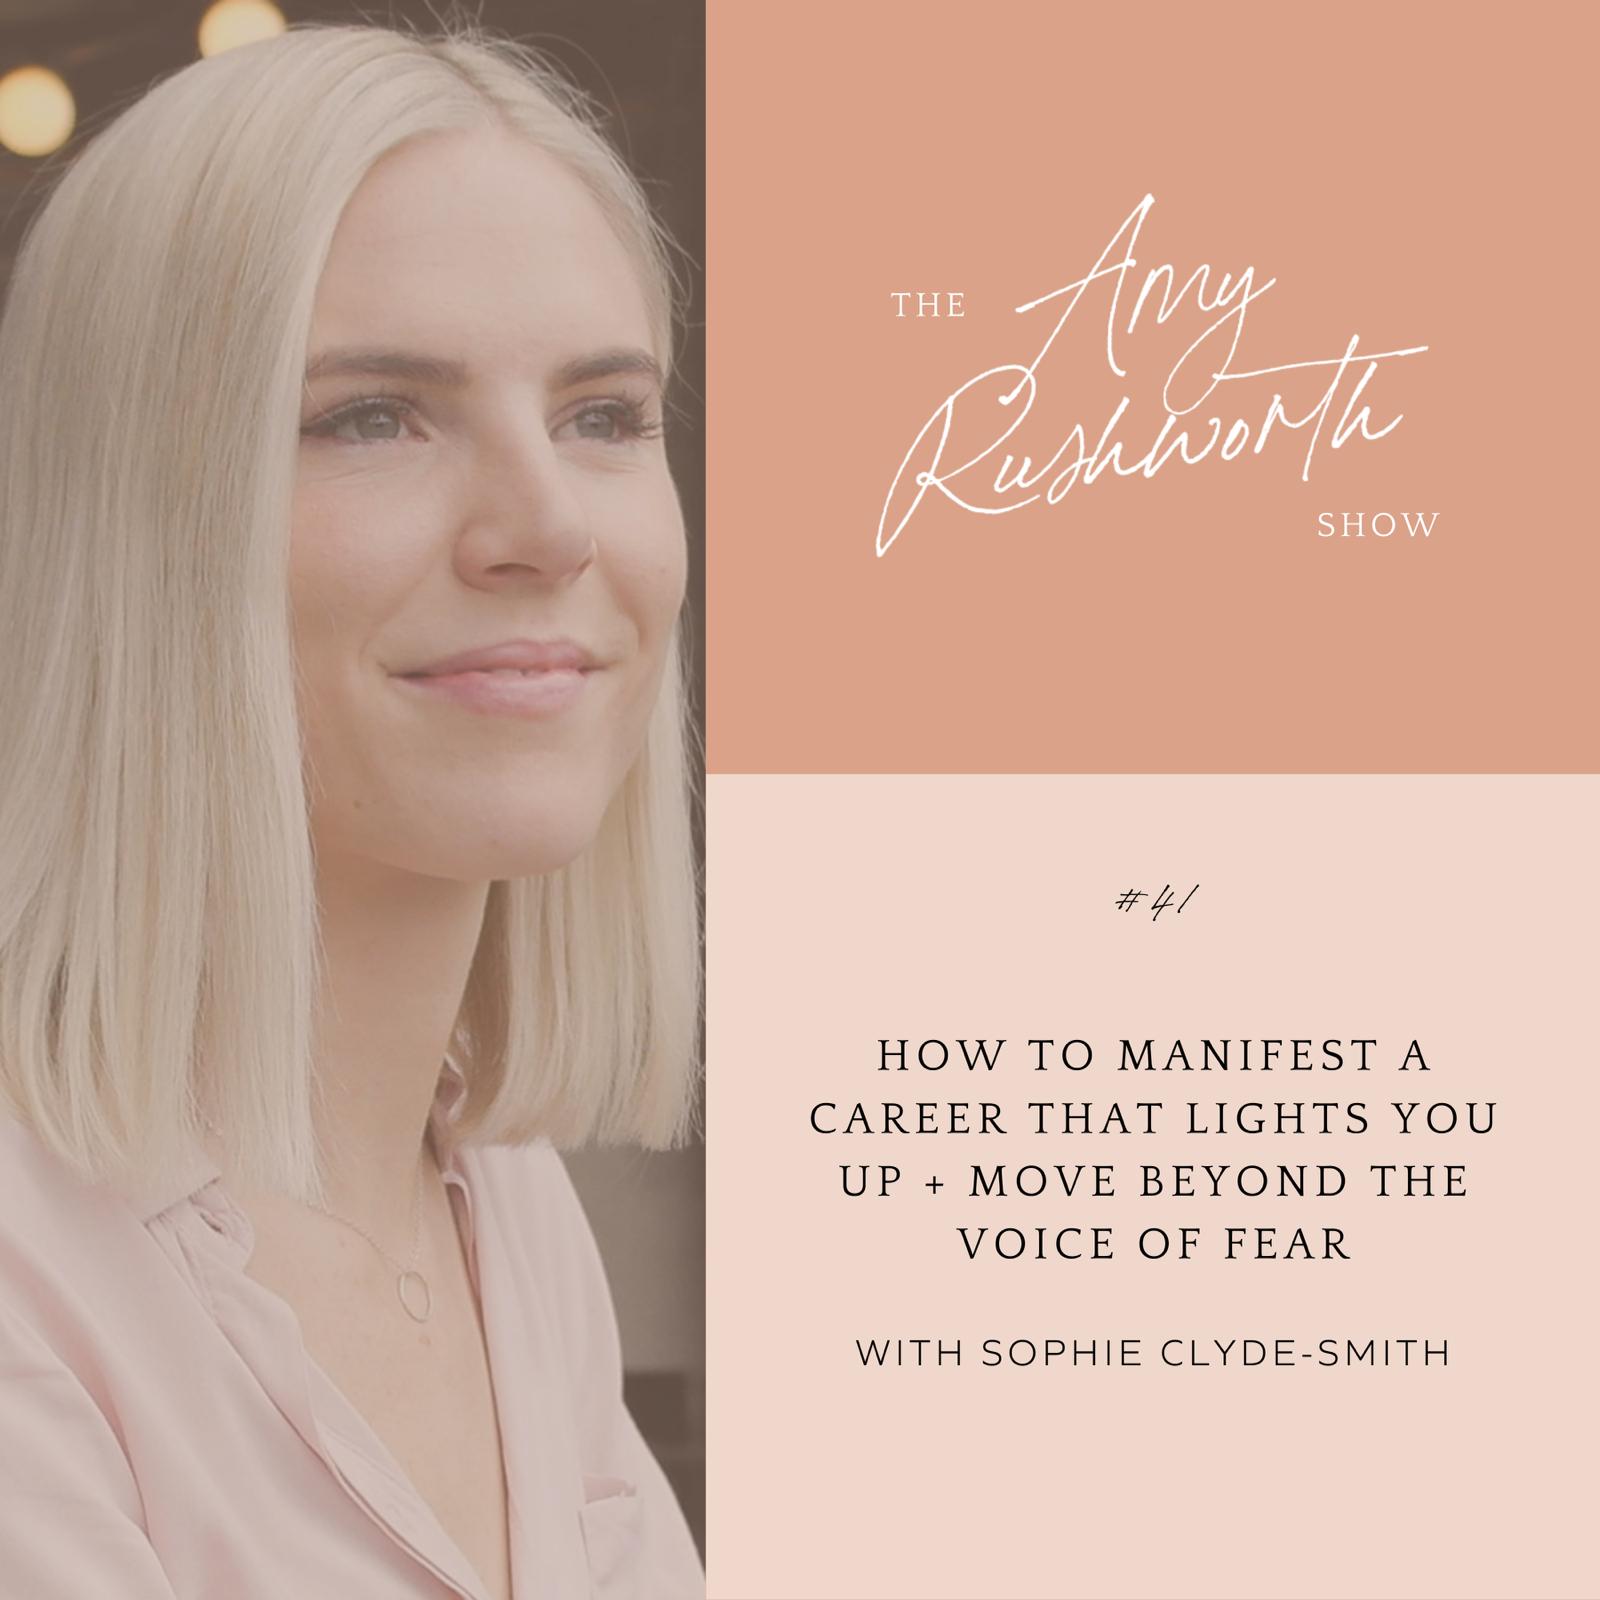 Episode 41: How To Manifest A Career That Lights You Up + Move Beyond The Voice of Fear